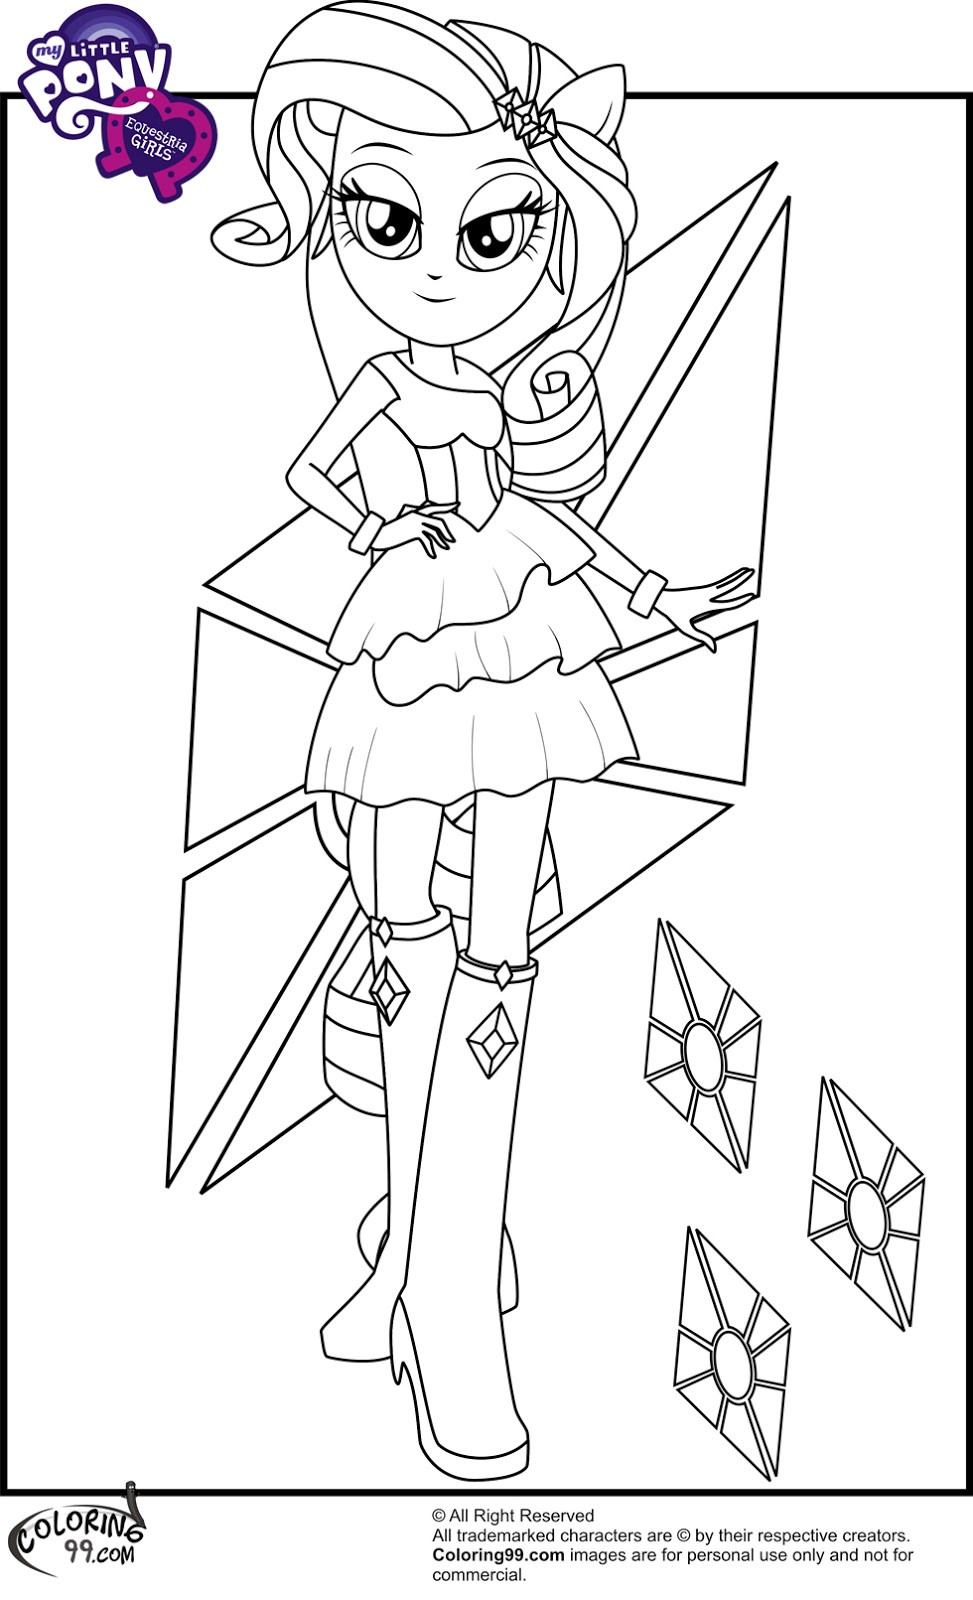 Coloring Pages Equestria Girls
 My Little Pony Equestria Girls Coloring Pages